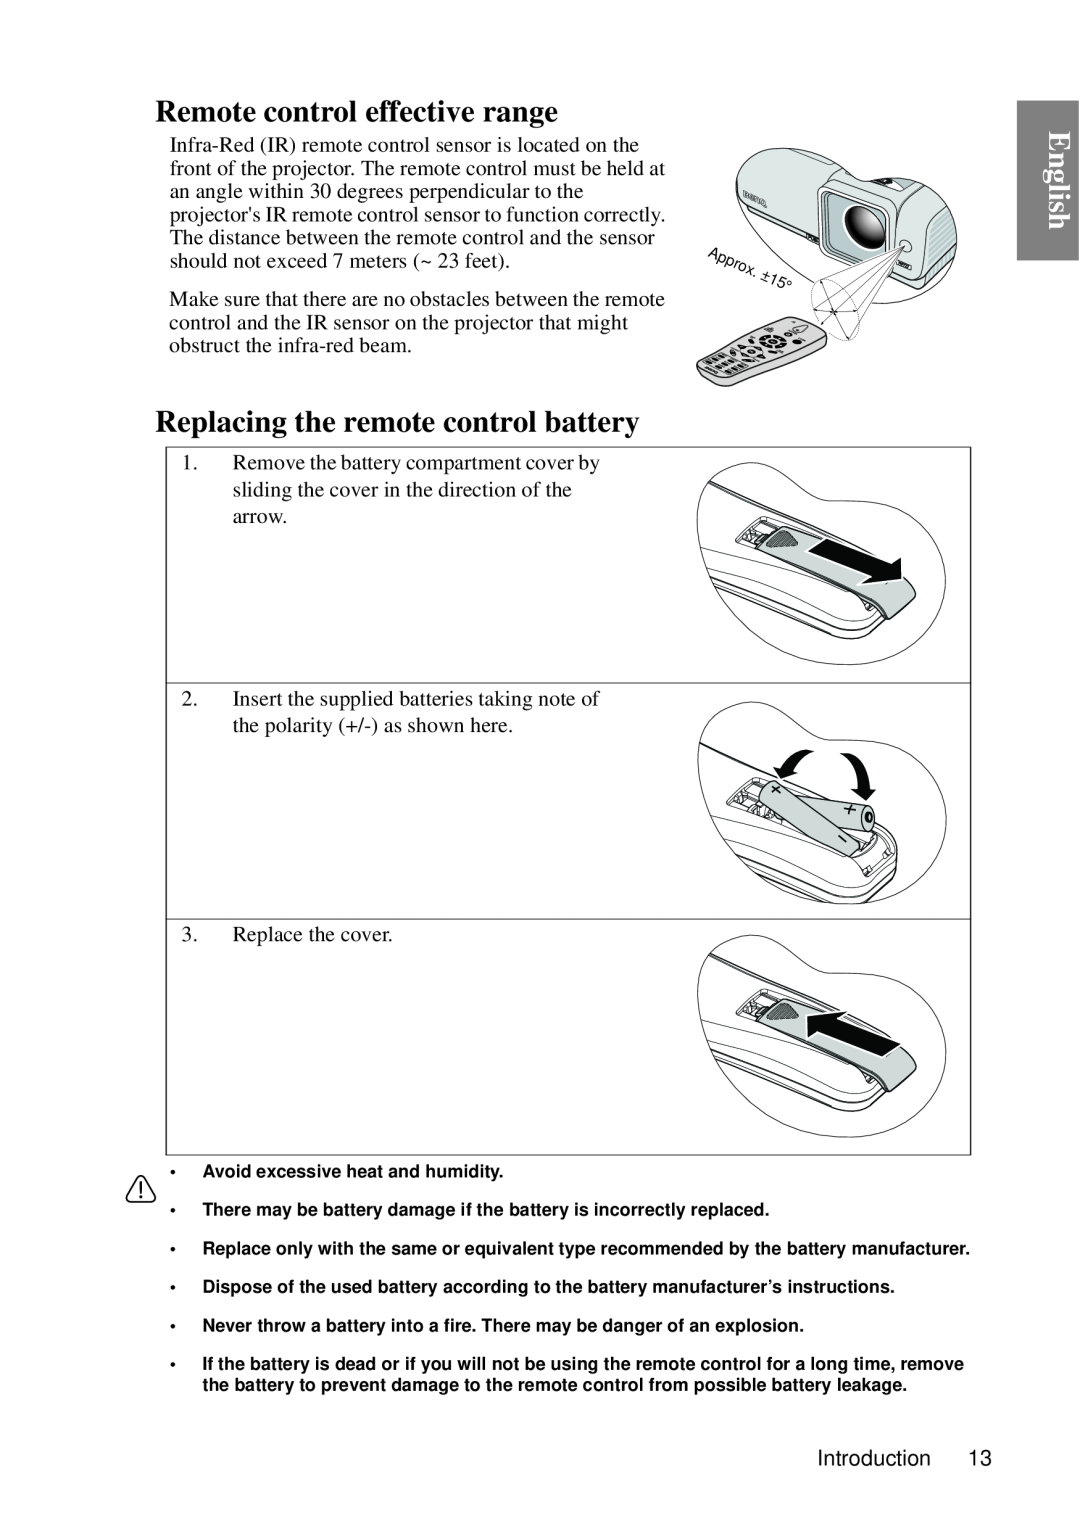 BenQ MP727, MP735 user manual Remote control effective range, Replacing the remote control battery, English 